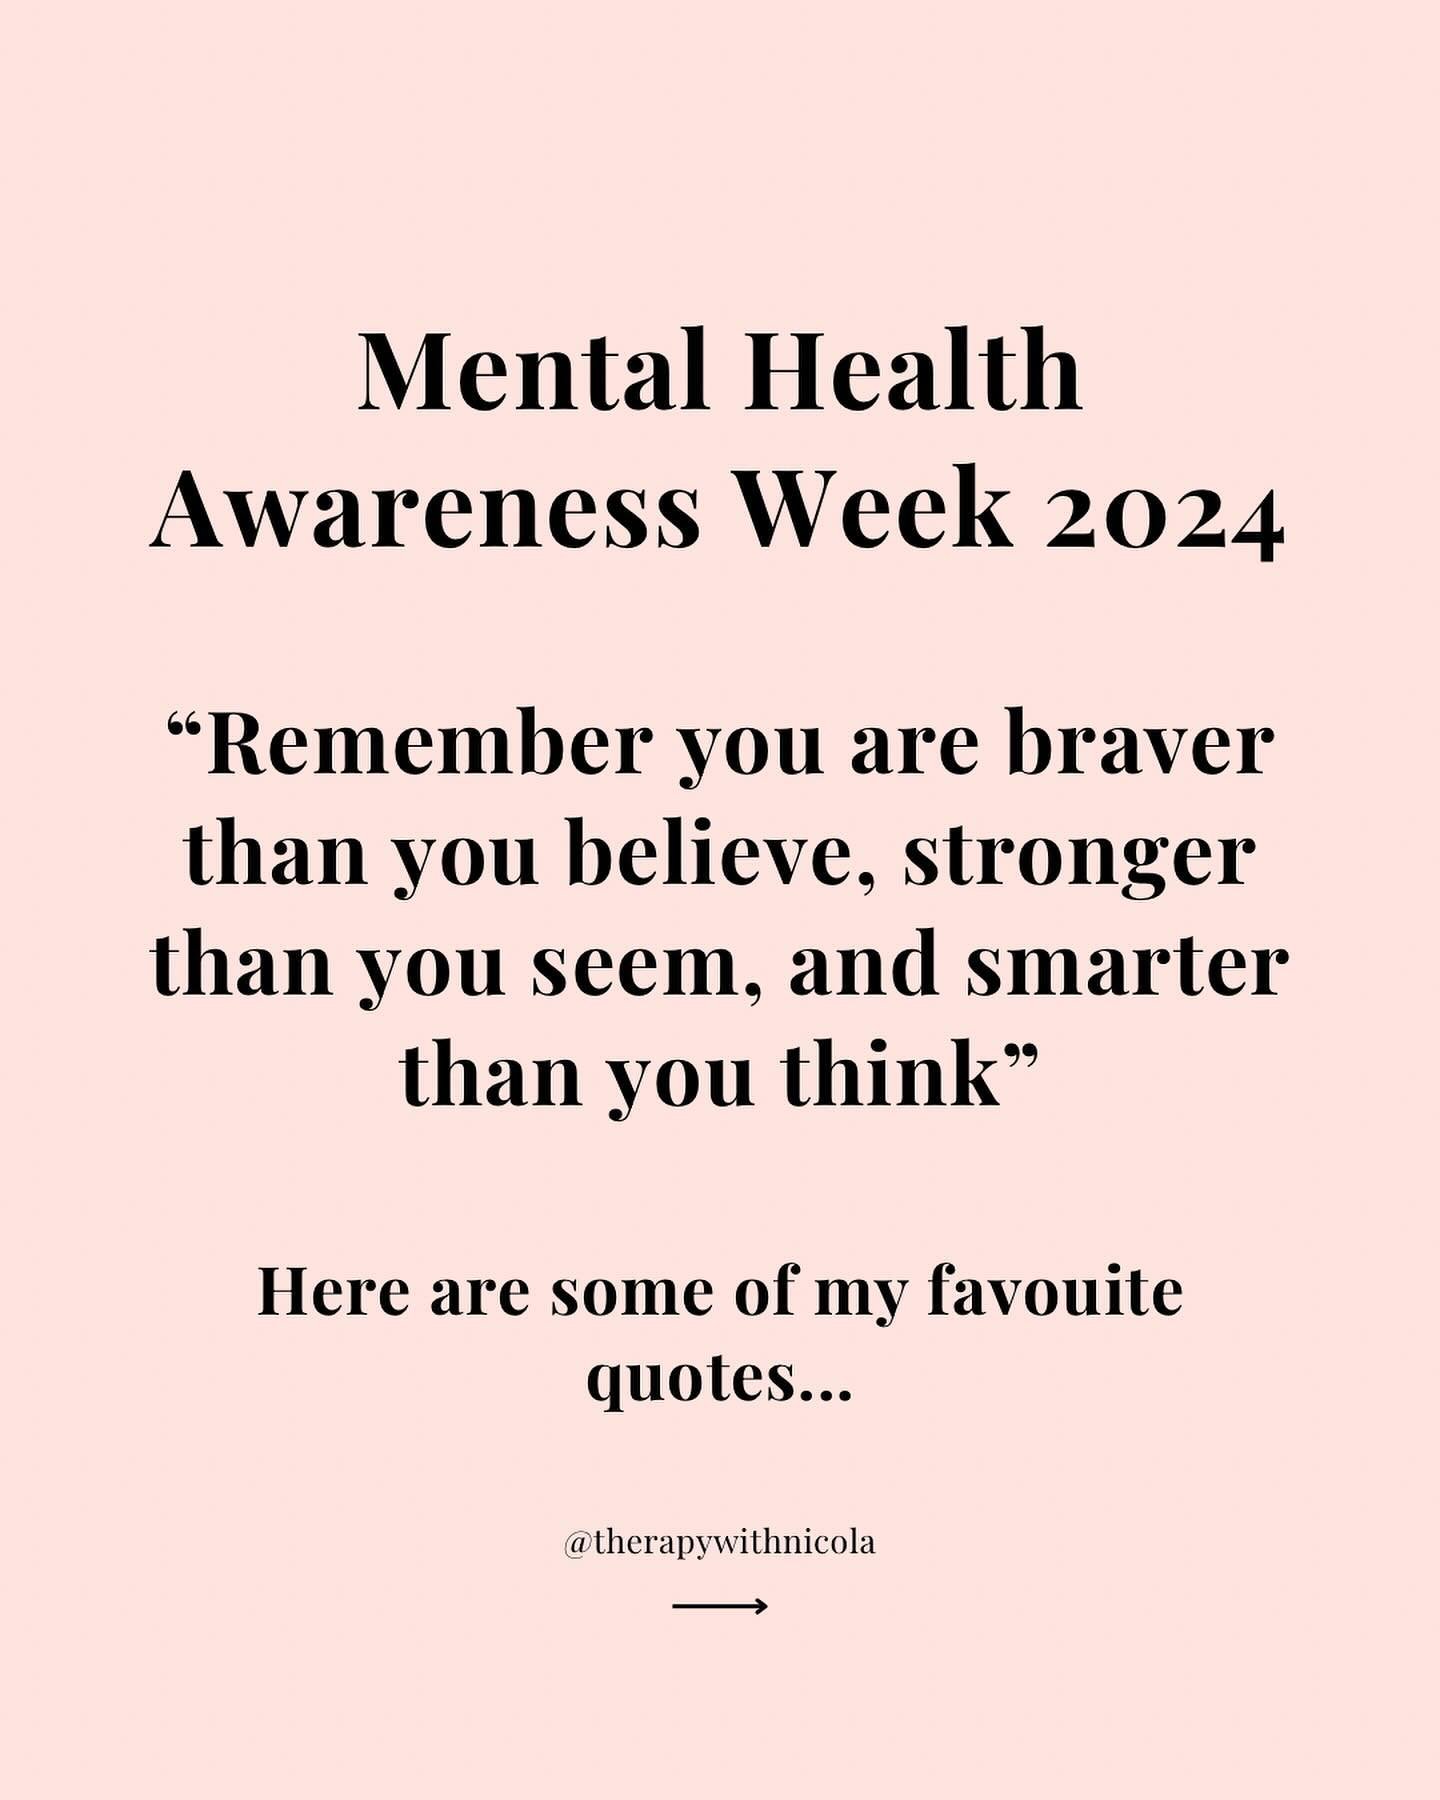 Save this as a reminder in times of need! Here are some of my favourite quotes for mental health week. Which is your favourite?

Get in touch to book an appointment

Click the link in bio or visit www.therapywithnicola.com

Appointments available in 